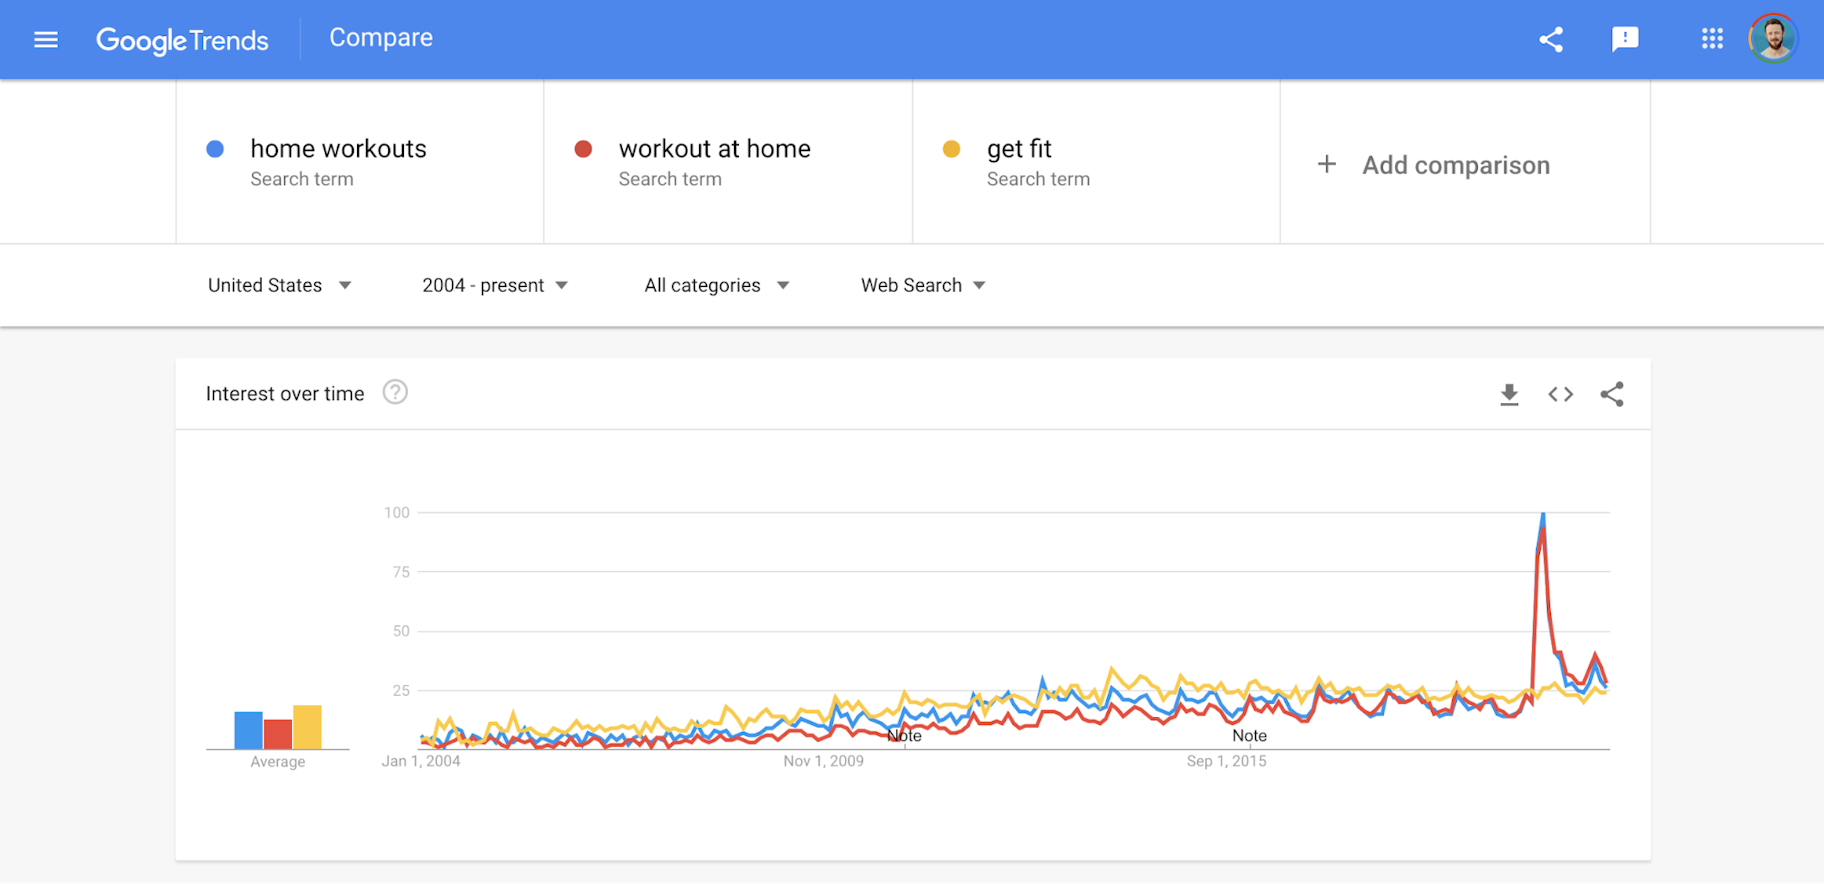 Selling Digital Products: Research with Google Trends